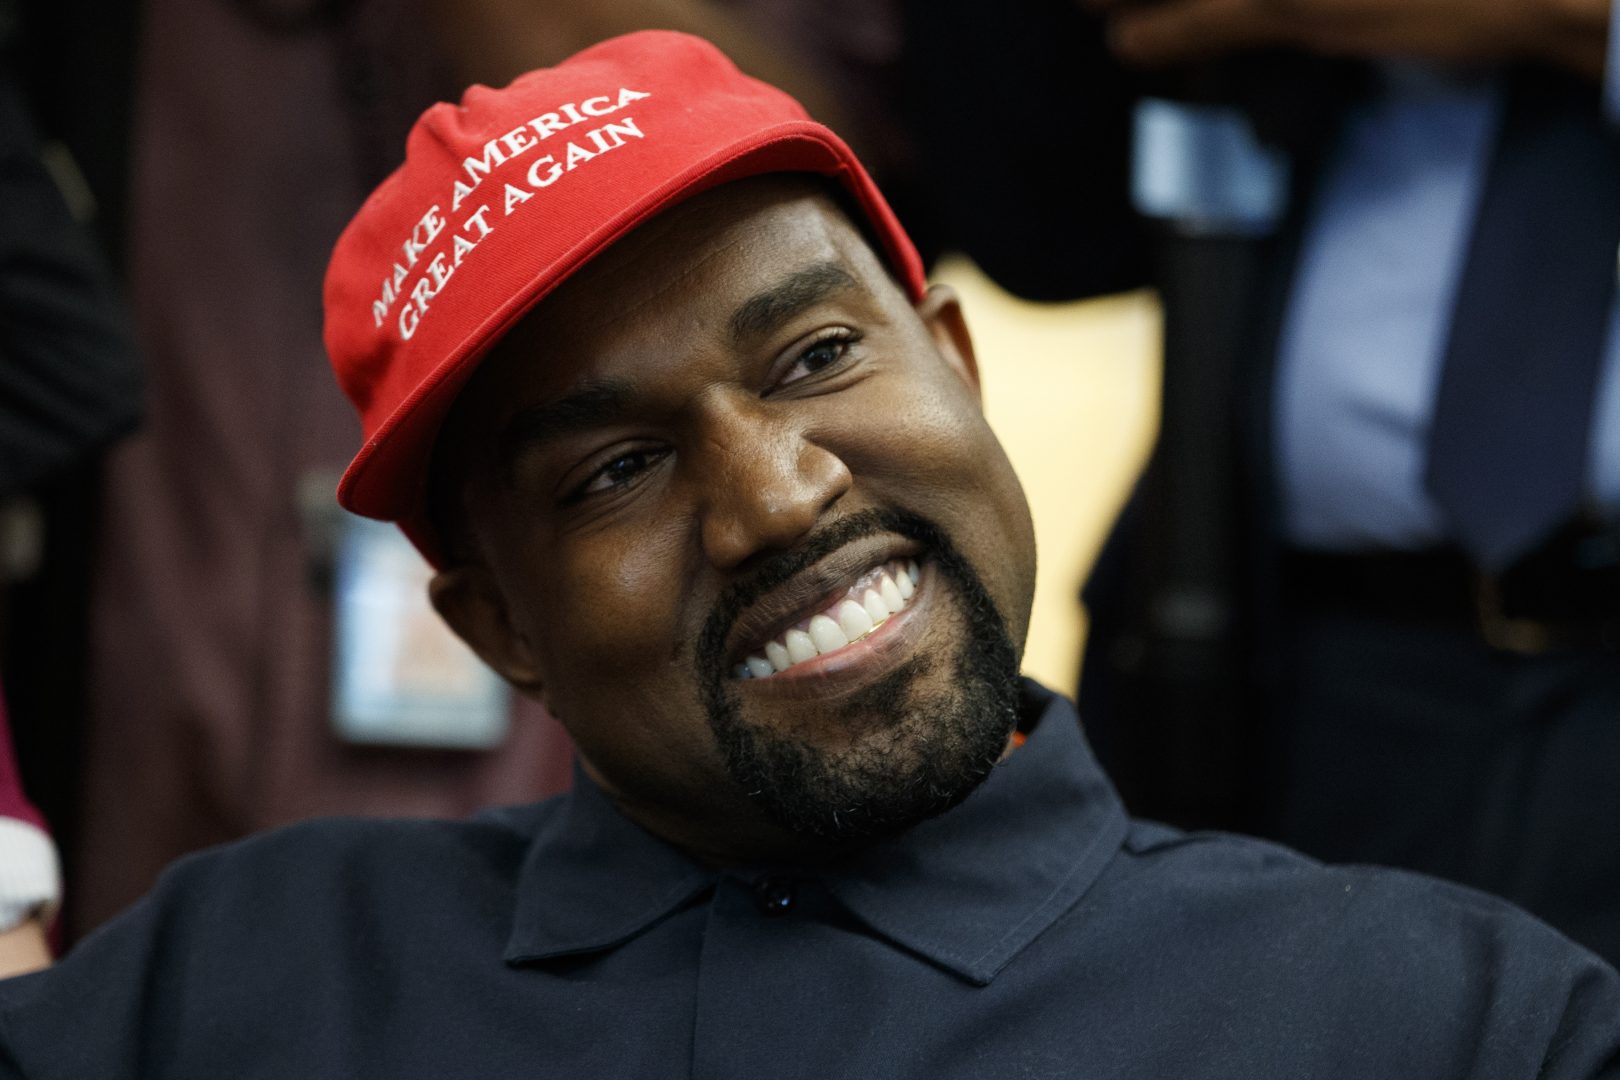 Rapper Kanye West smiles as he listens to a question from a reporter during a meeting in the Oval Office of the White House with President Donald Trump, Thursday, Oct. 11, 2018, in Washington. (AP Photo/Evan Vucci)